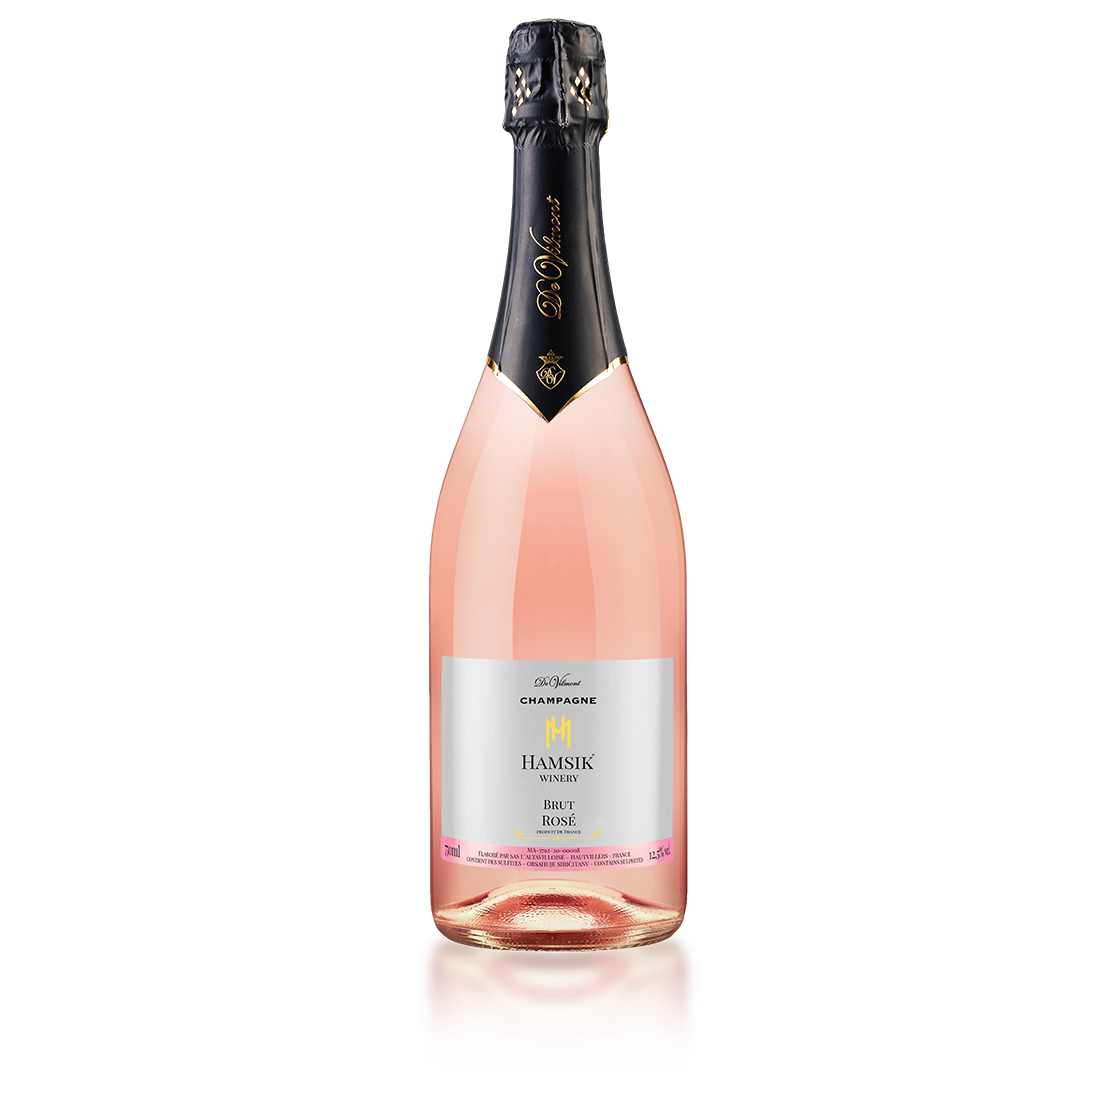 https://www.hamsikwinery.com/wp-content/uploads/2023/10/Hamsik-winery-champagne-rose.png